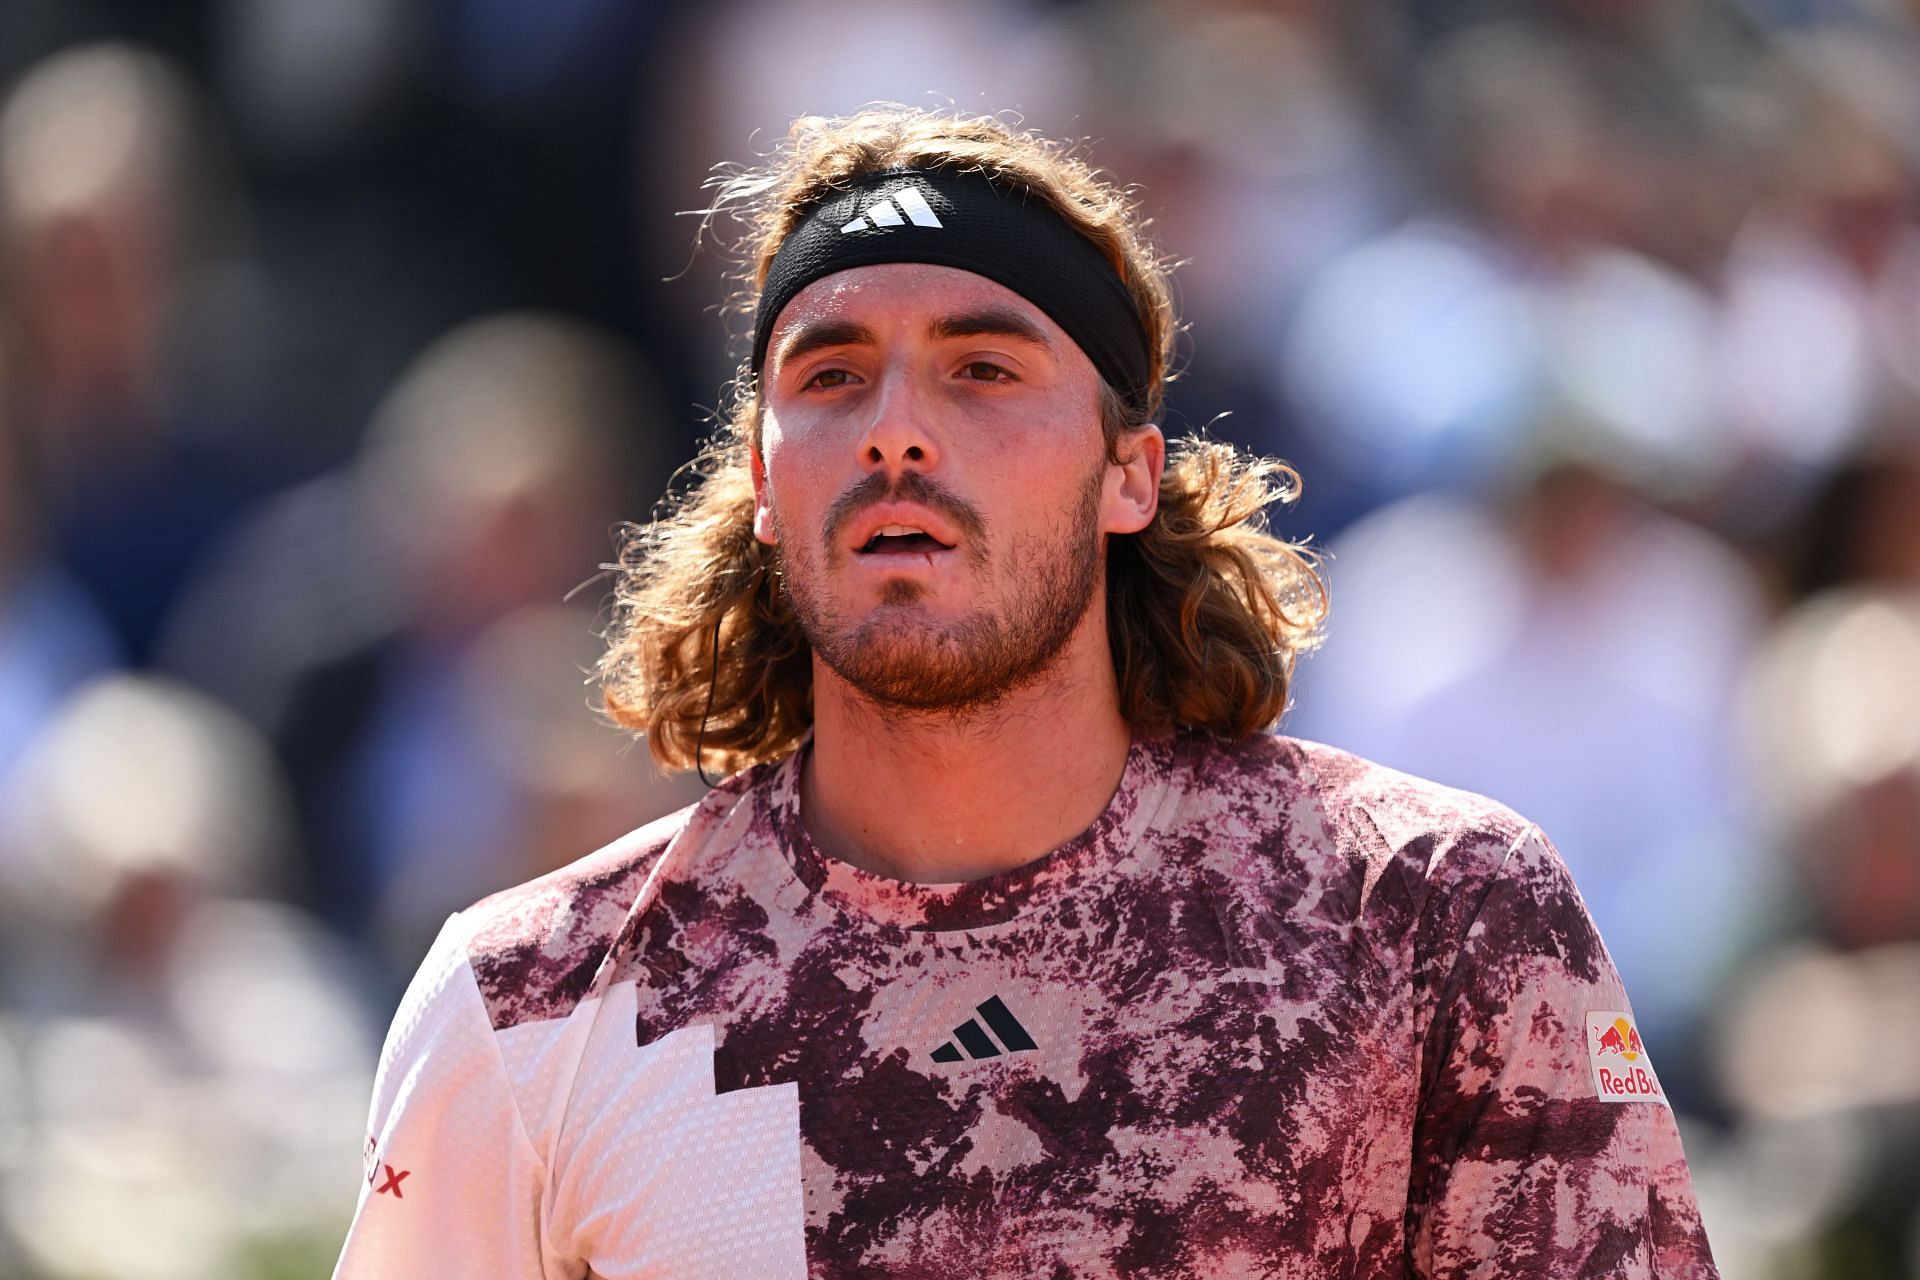 Stefanos Tsitsipas is seeded fourth at the Madrid Open